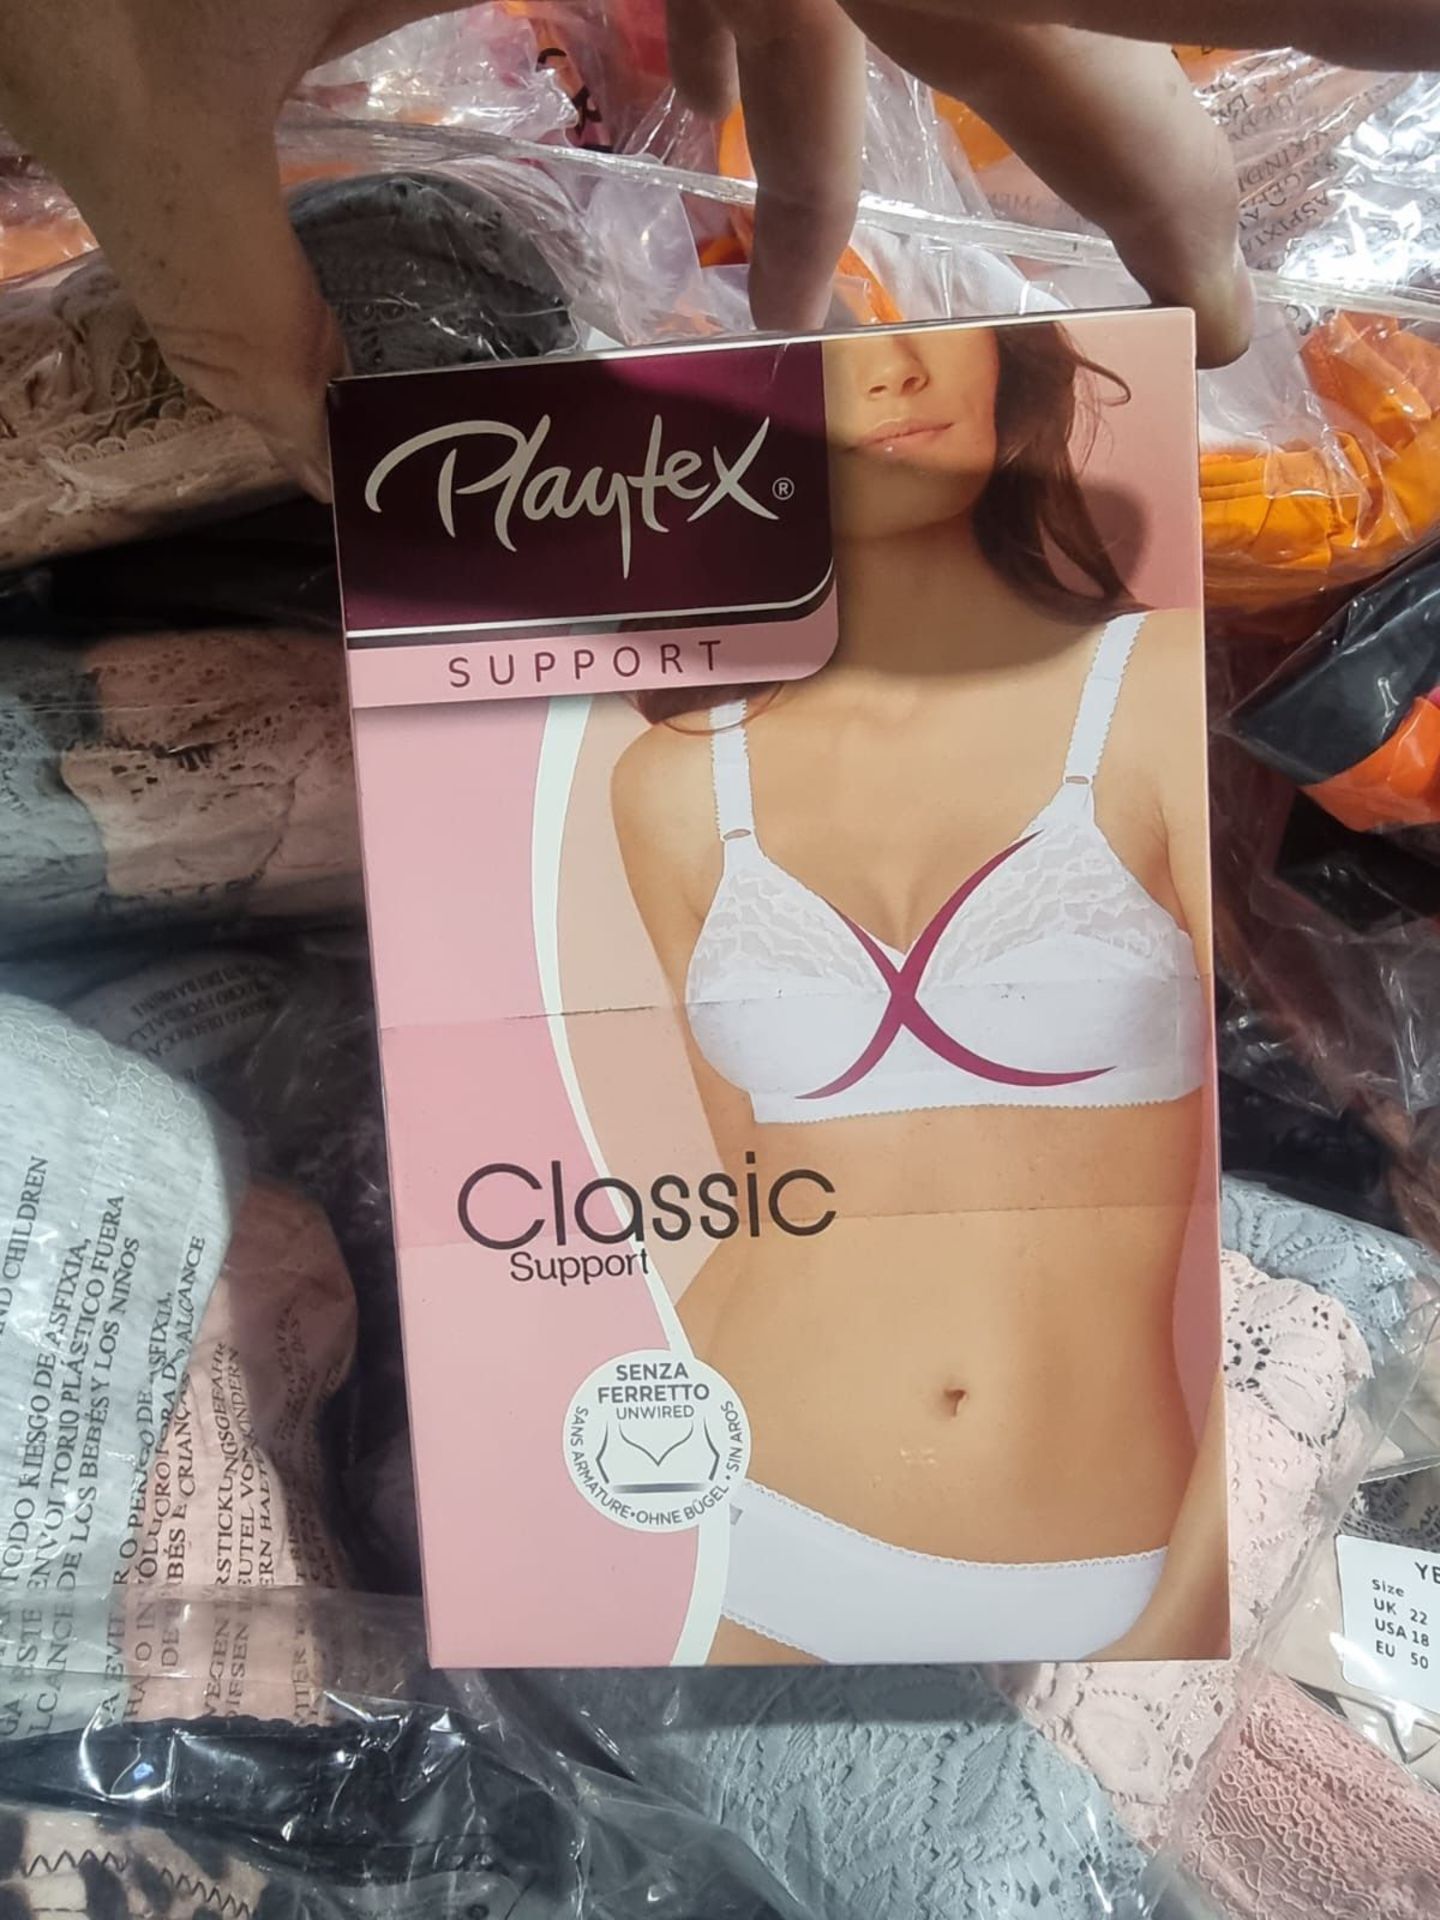 100 x NEW PACKAGED ASSORTED SWIM & UNDERWEAR FROM BRAND SUCH AS WONDERBRA, BOUX AVENUE, ANN SUMMERS, - Image 14 of 53